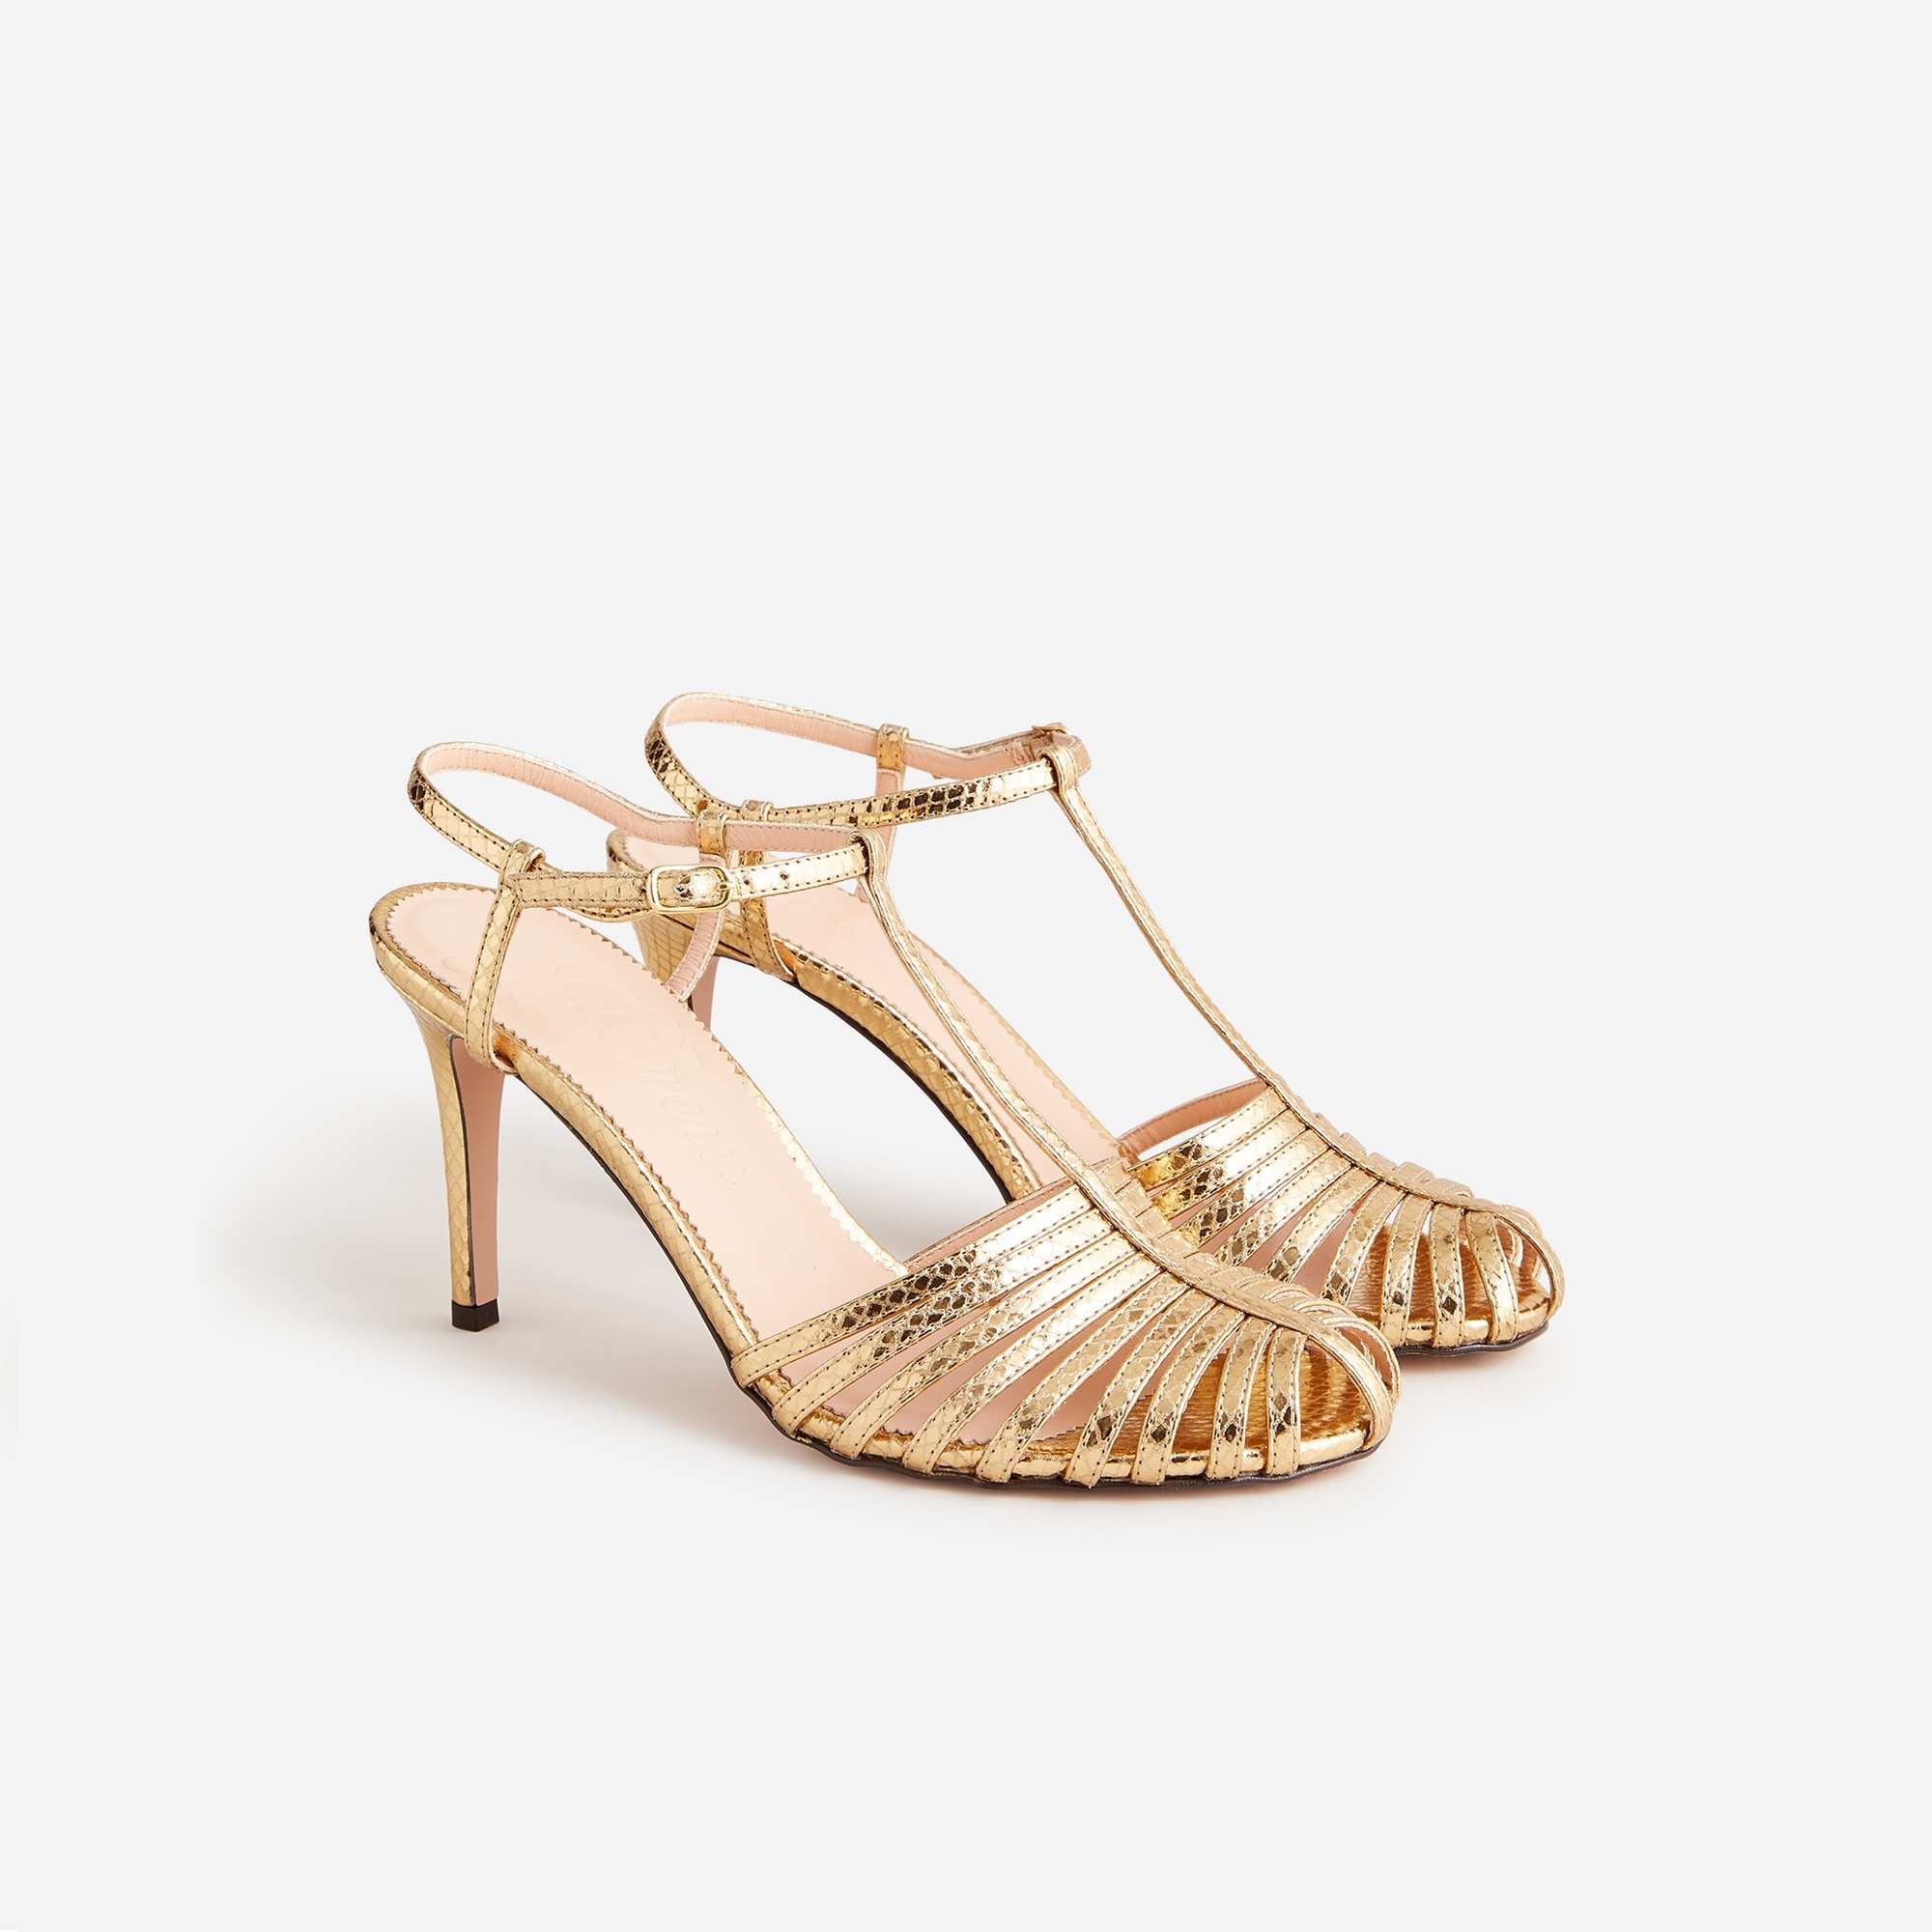  Collection Rylie caged-toe heels in snake-embossed Italian leather